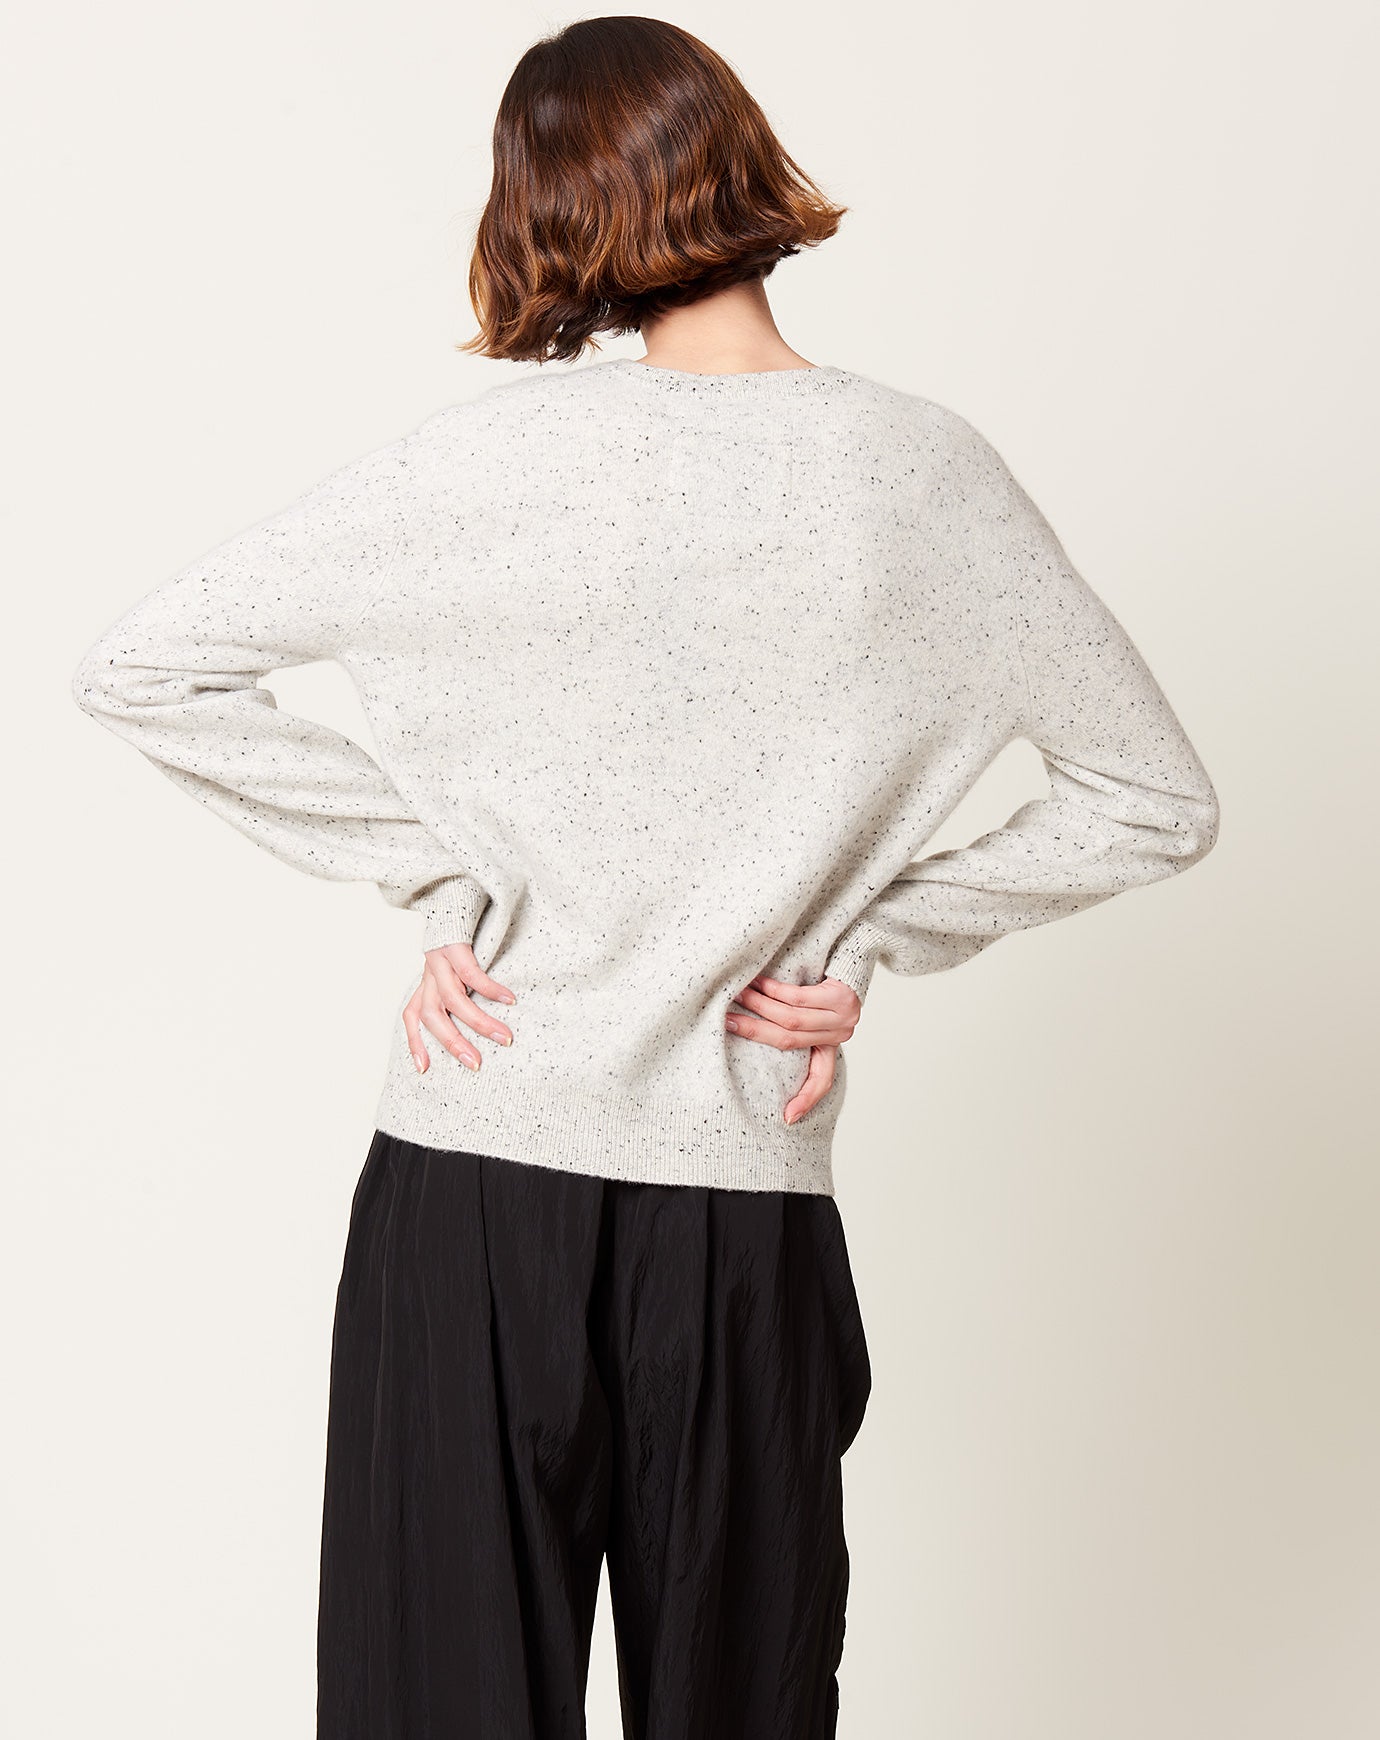 Frenckenberger Mini R Neck Sweater in Pointilised Frost